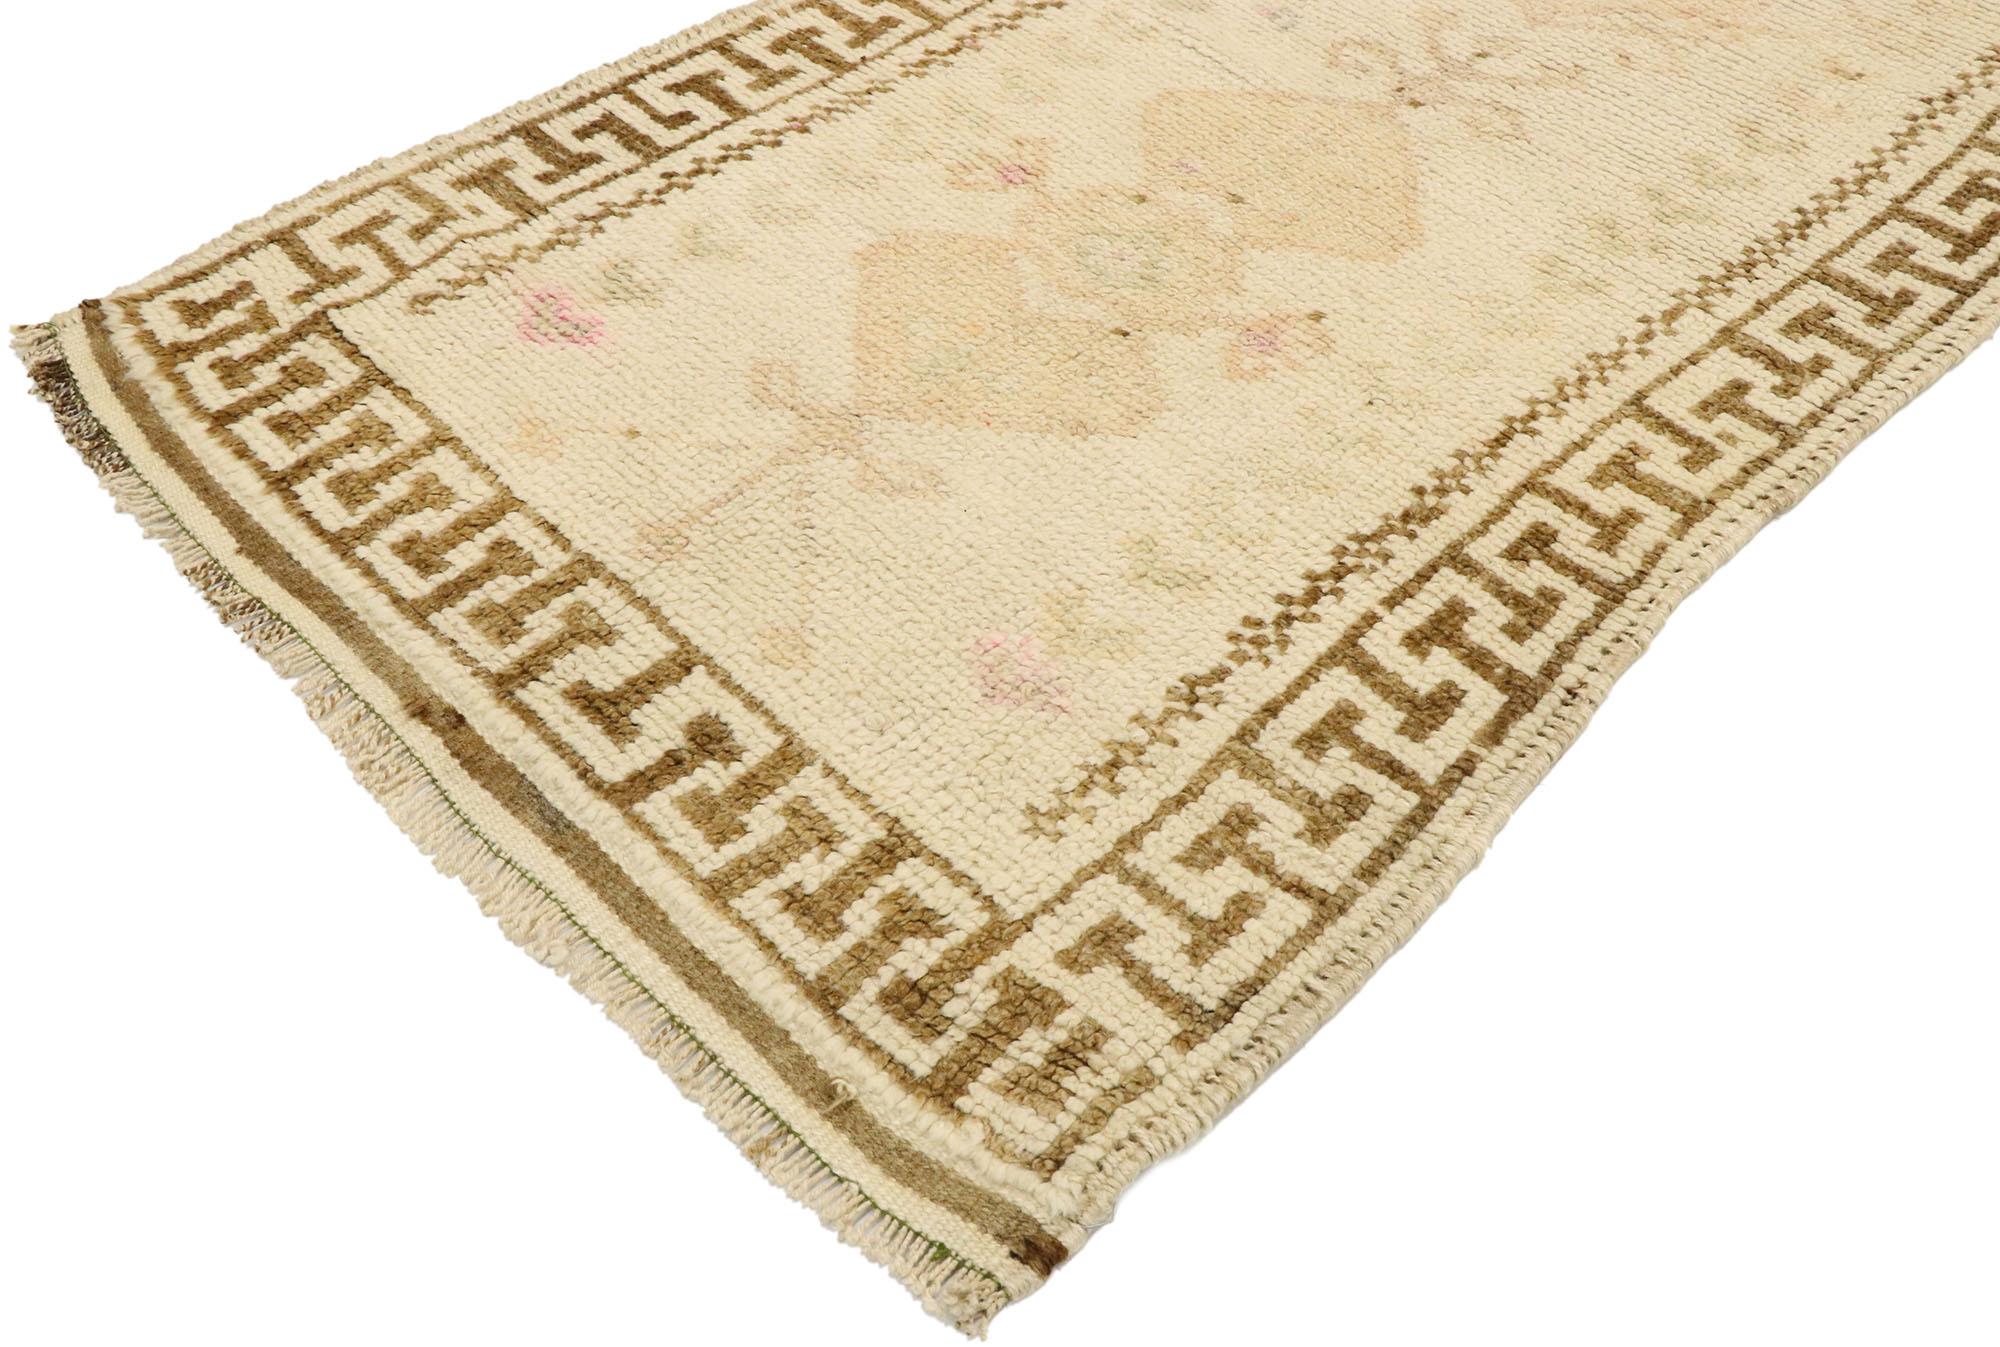 53085, vintage Turkish Oushak runner with romantic shaker boho chic cottage style. Softer yet no less striking, this hand knotted wool vintage Turkish Oushak runner beautifully showcases a barely-there geometric botanical design peeking through the